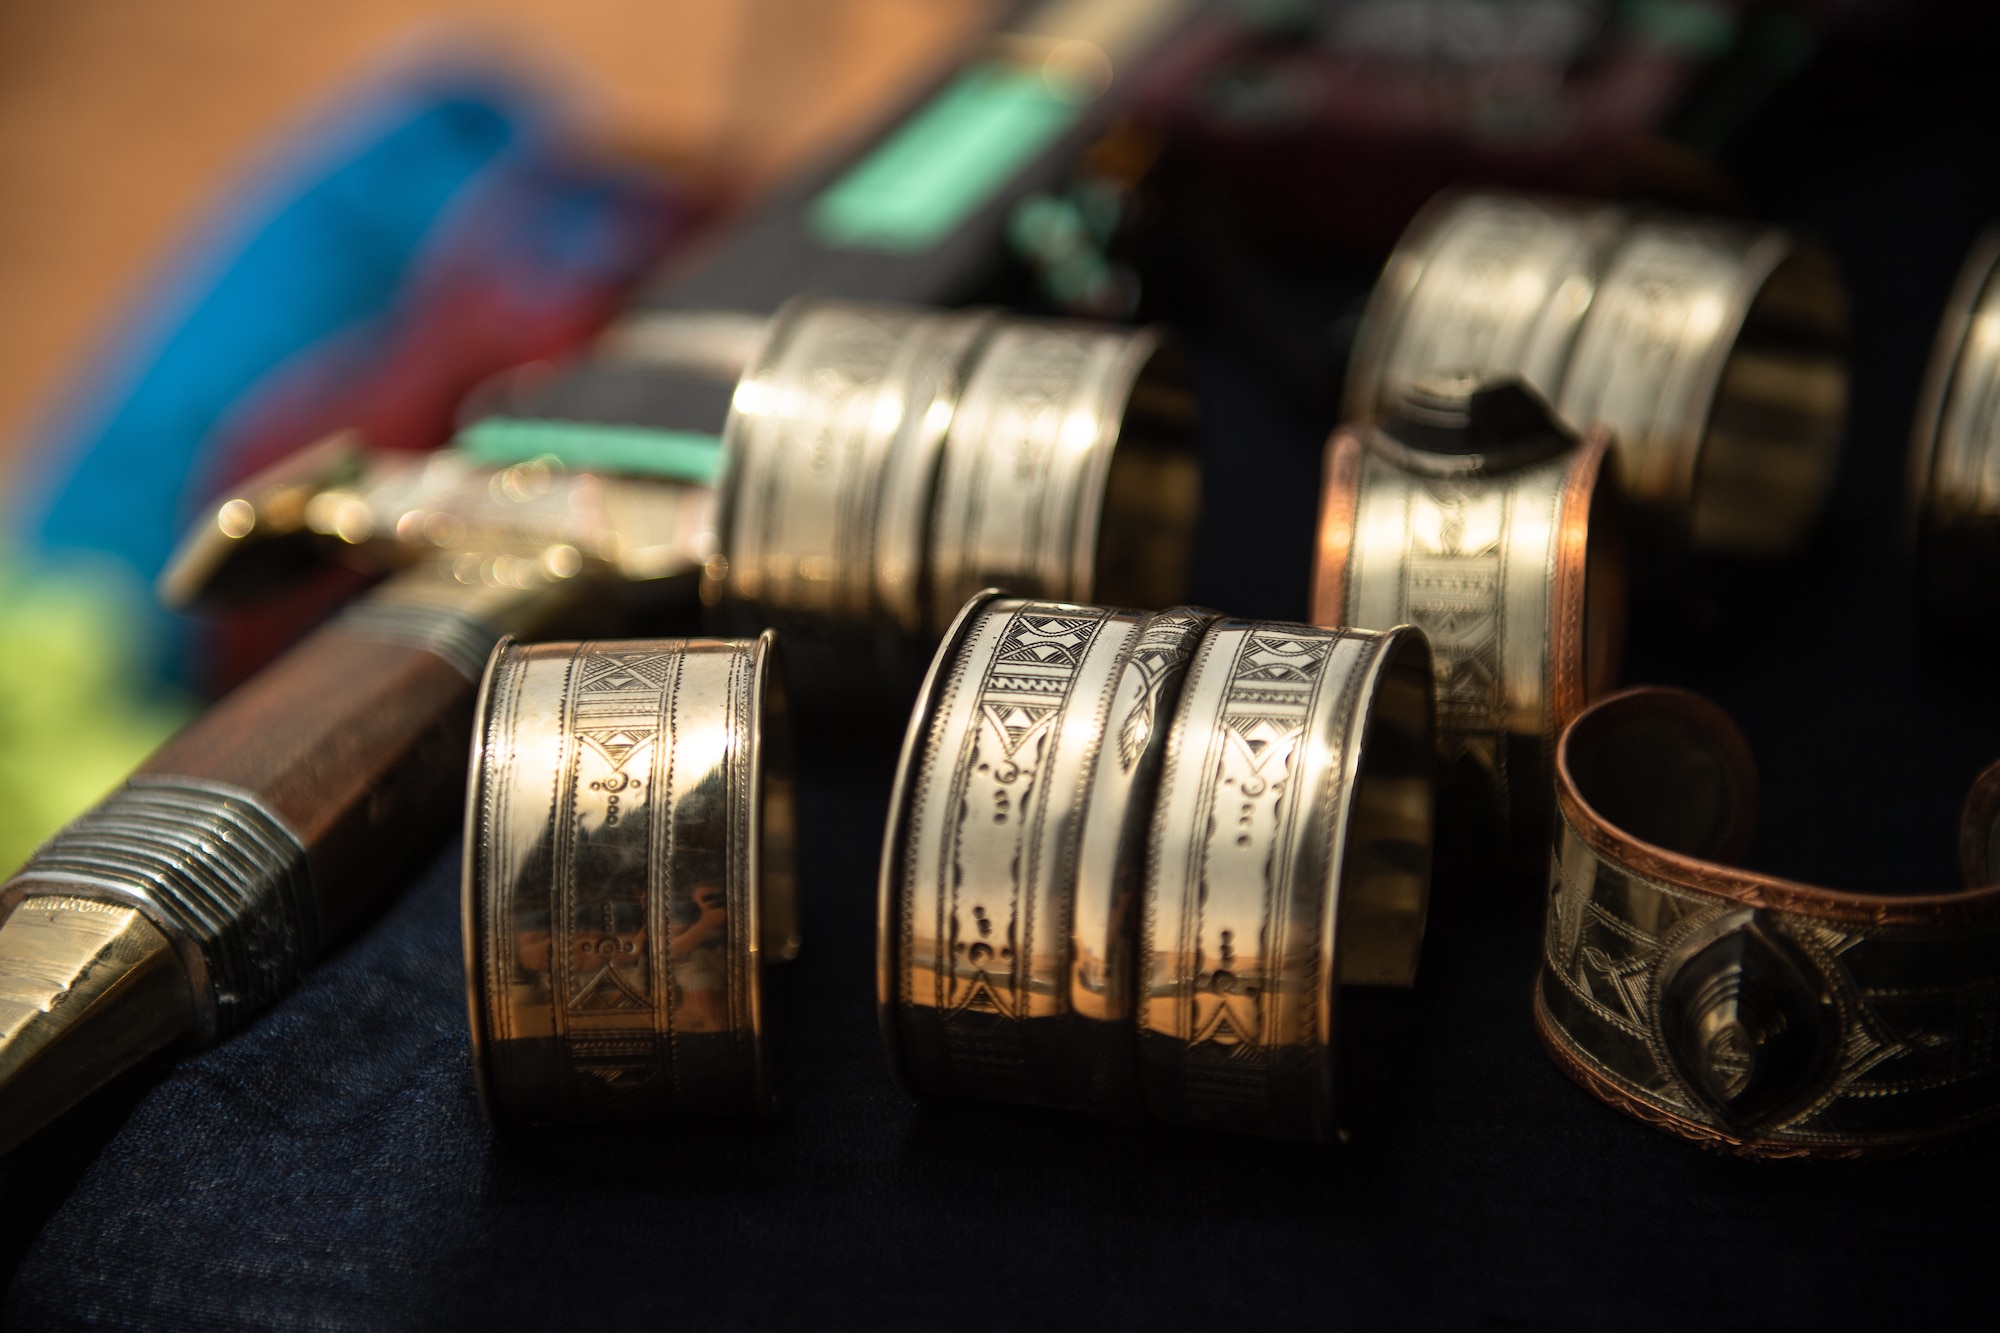 Handmade bracelets sit on a table during a bazaar at Nigerien Air Base 201 in Agadez, Niger, June 30, 2019. The base hosts the bazaar so service members who are deployed can experience the culture and bring home souvenirs to their families. (U.S. Air Force photo by Staff Sgt. Devin Boyer)